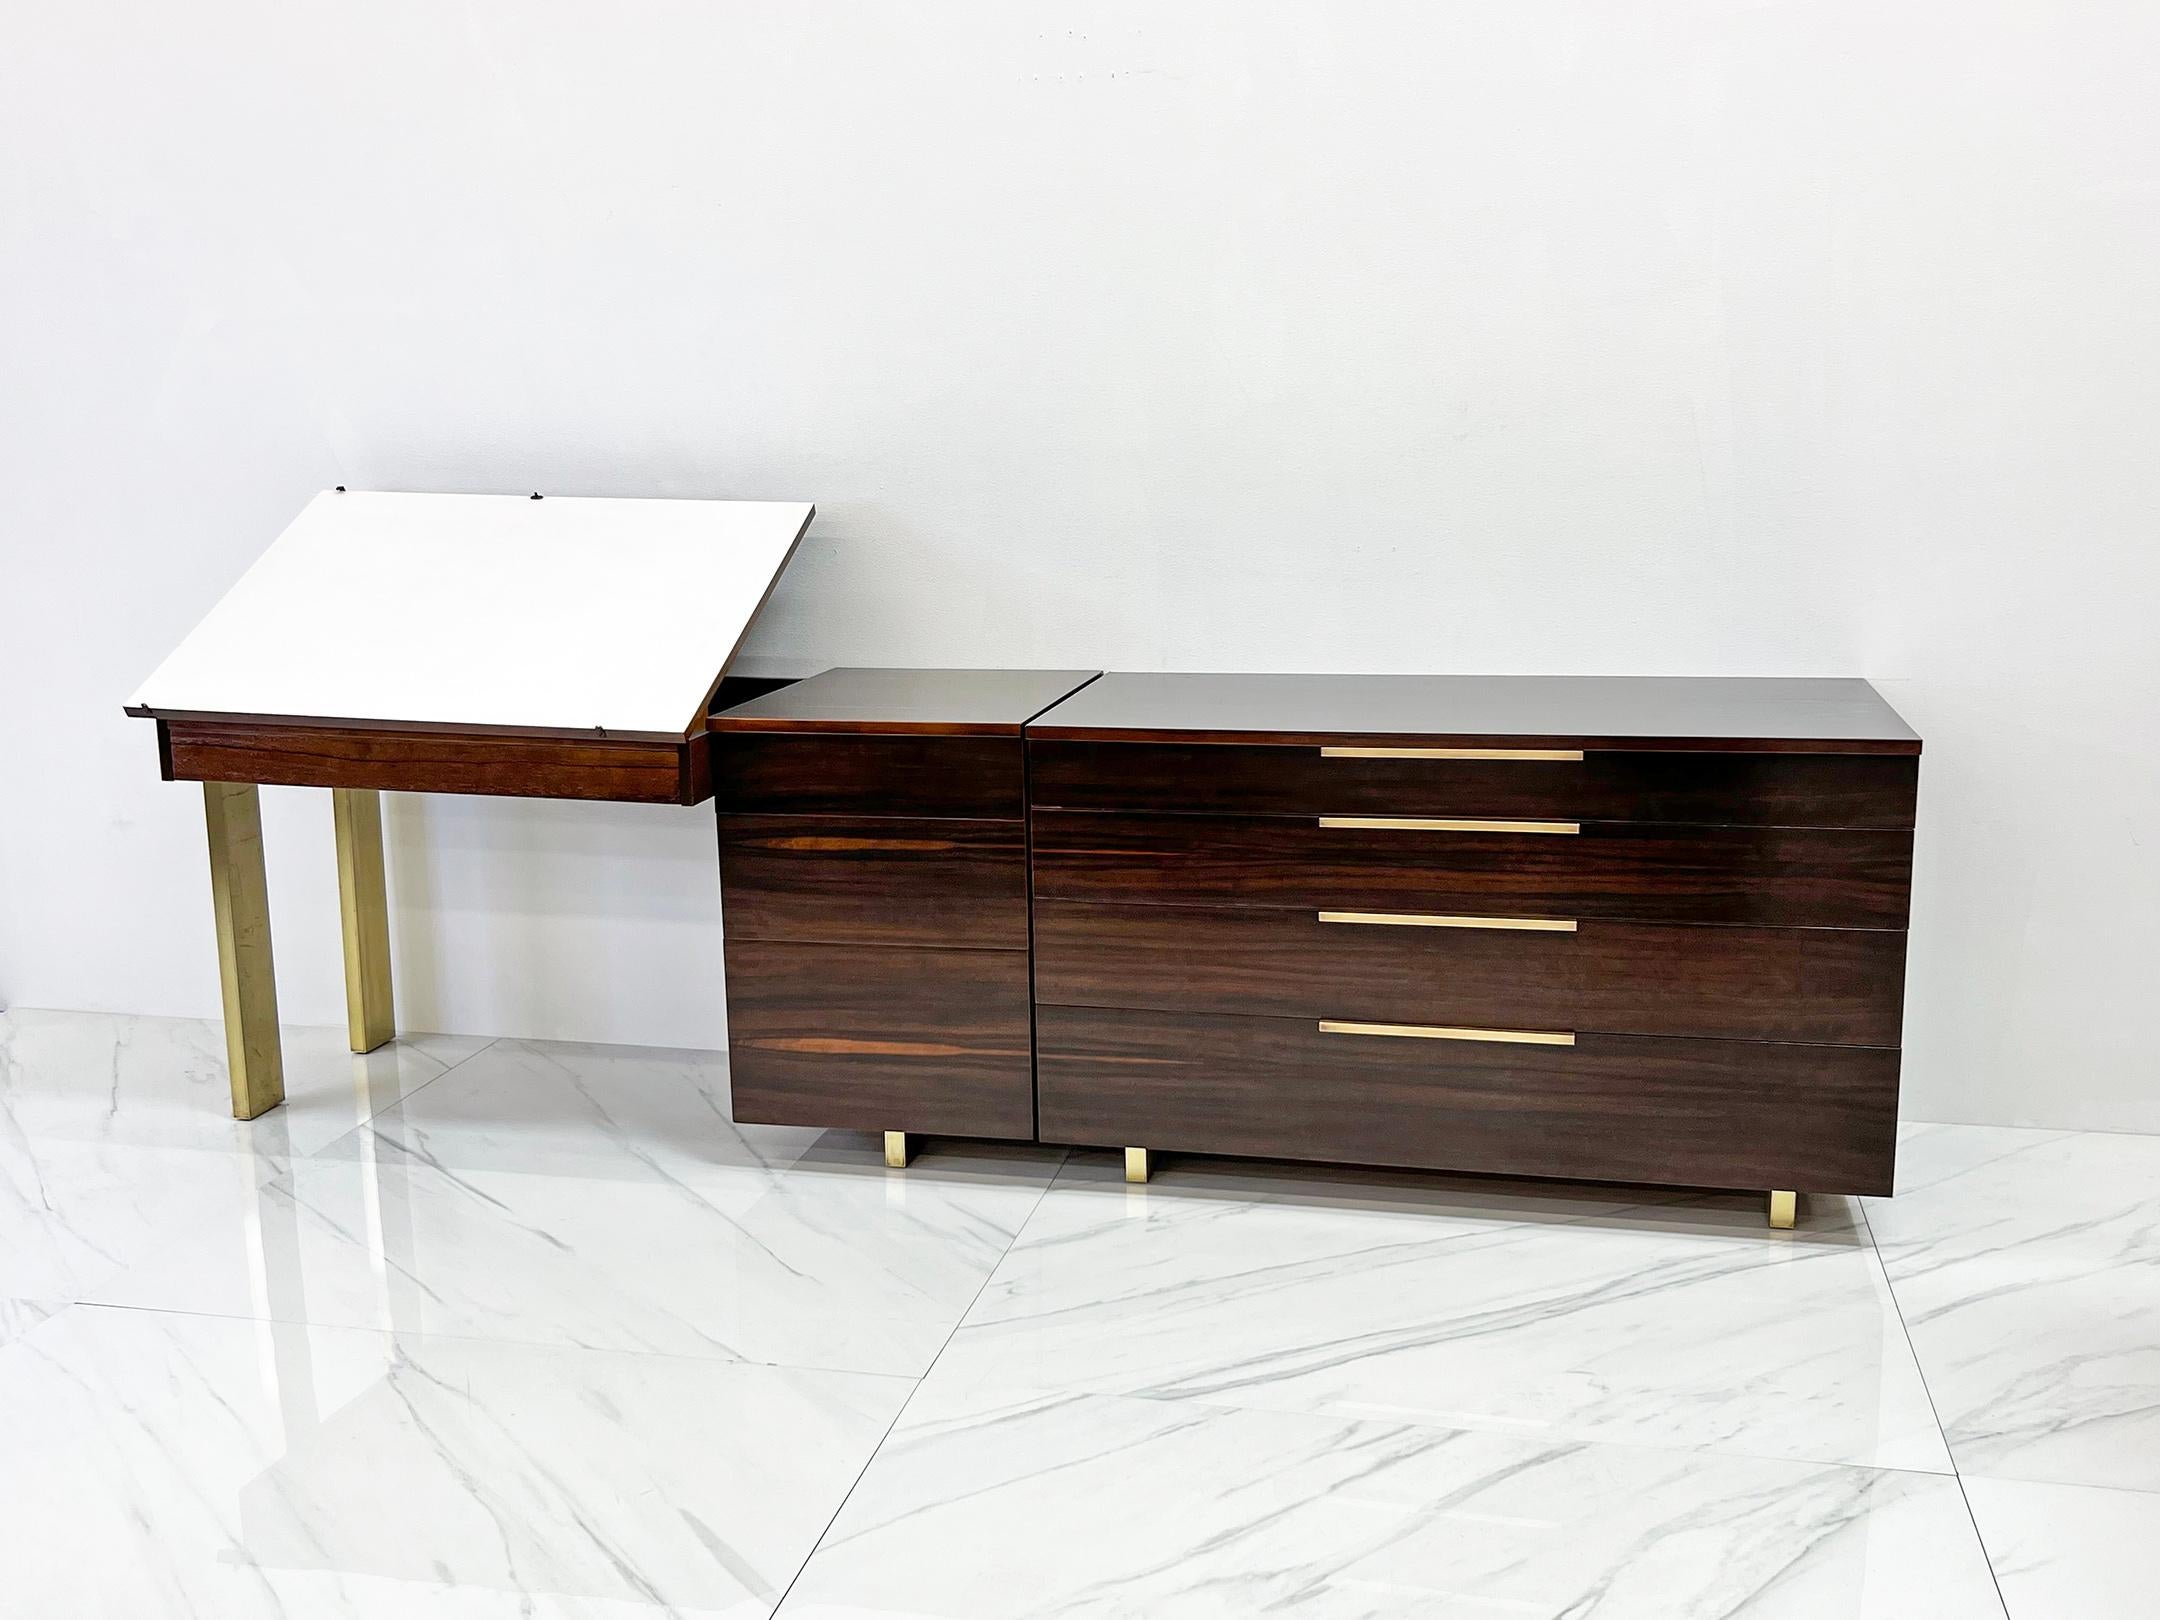 Important Vladimir Kagan Rosewood Brass Dresser, Desk Unit, 1950s In Good Condition For Sale In Culver City, CA